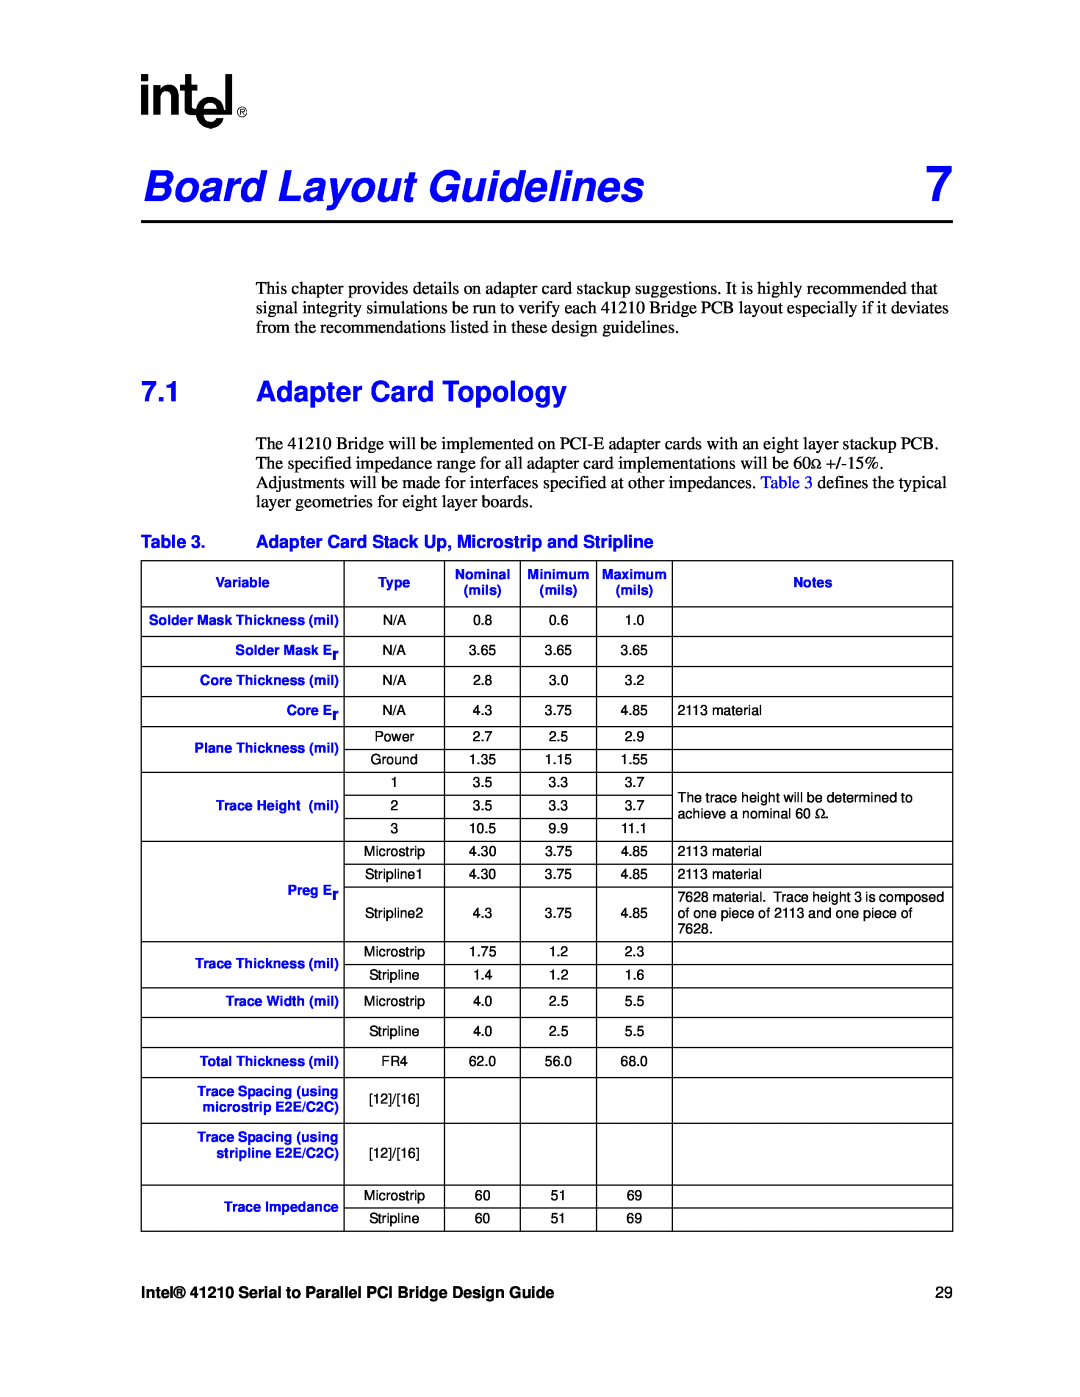 Intel 41210 manual Board Layout Guidelines, Adapter Card Topology, Adapter Card Stack Up, Microstrip and Stripline 